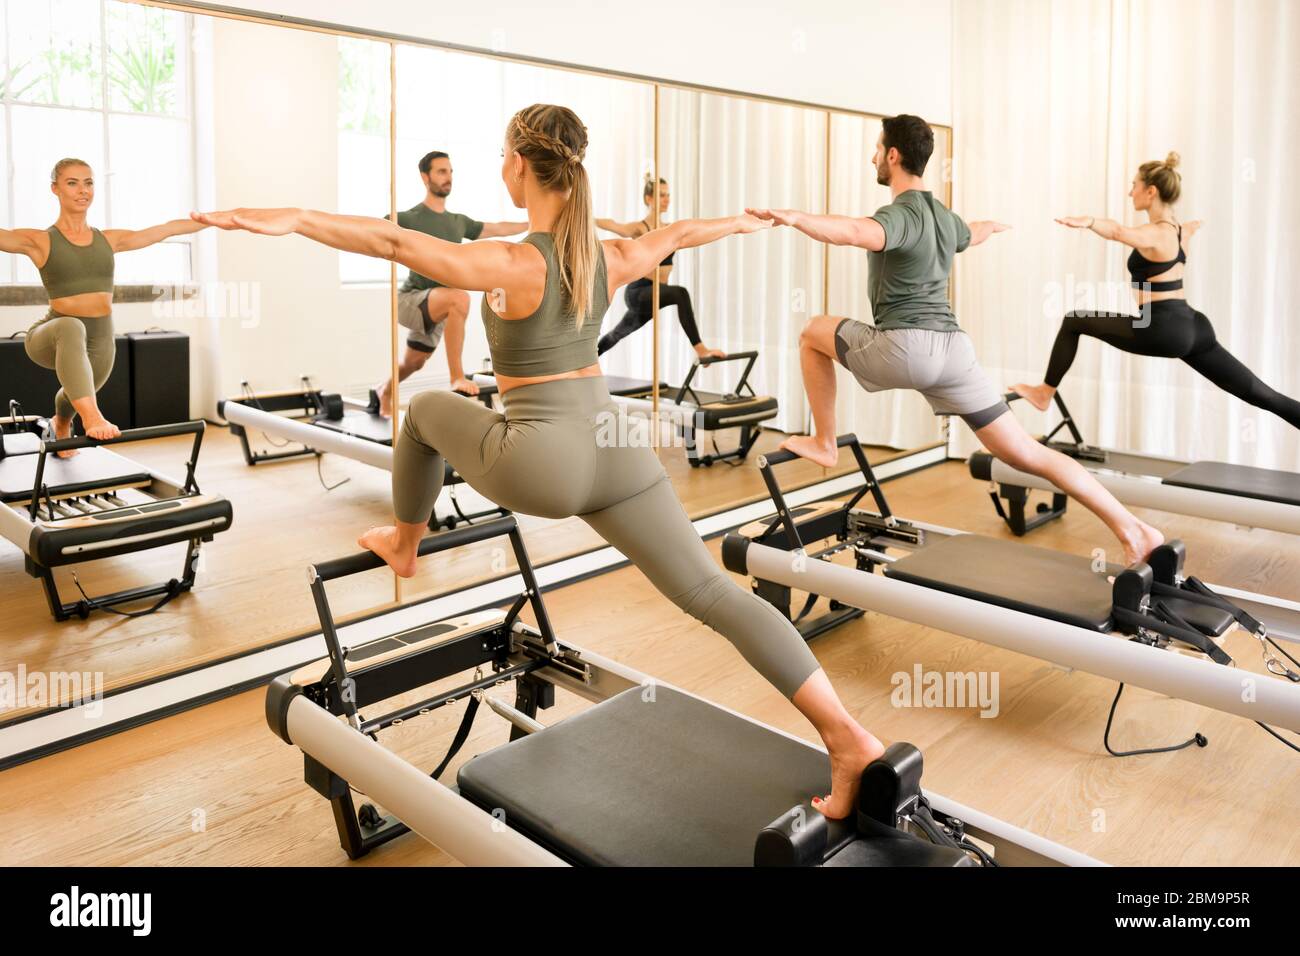 Pilates class of athletes doing a standing lunge exercise on